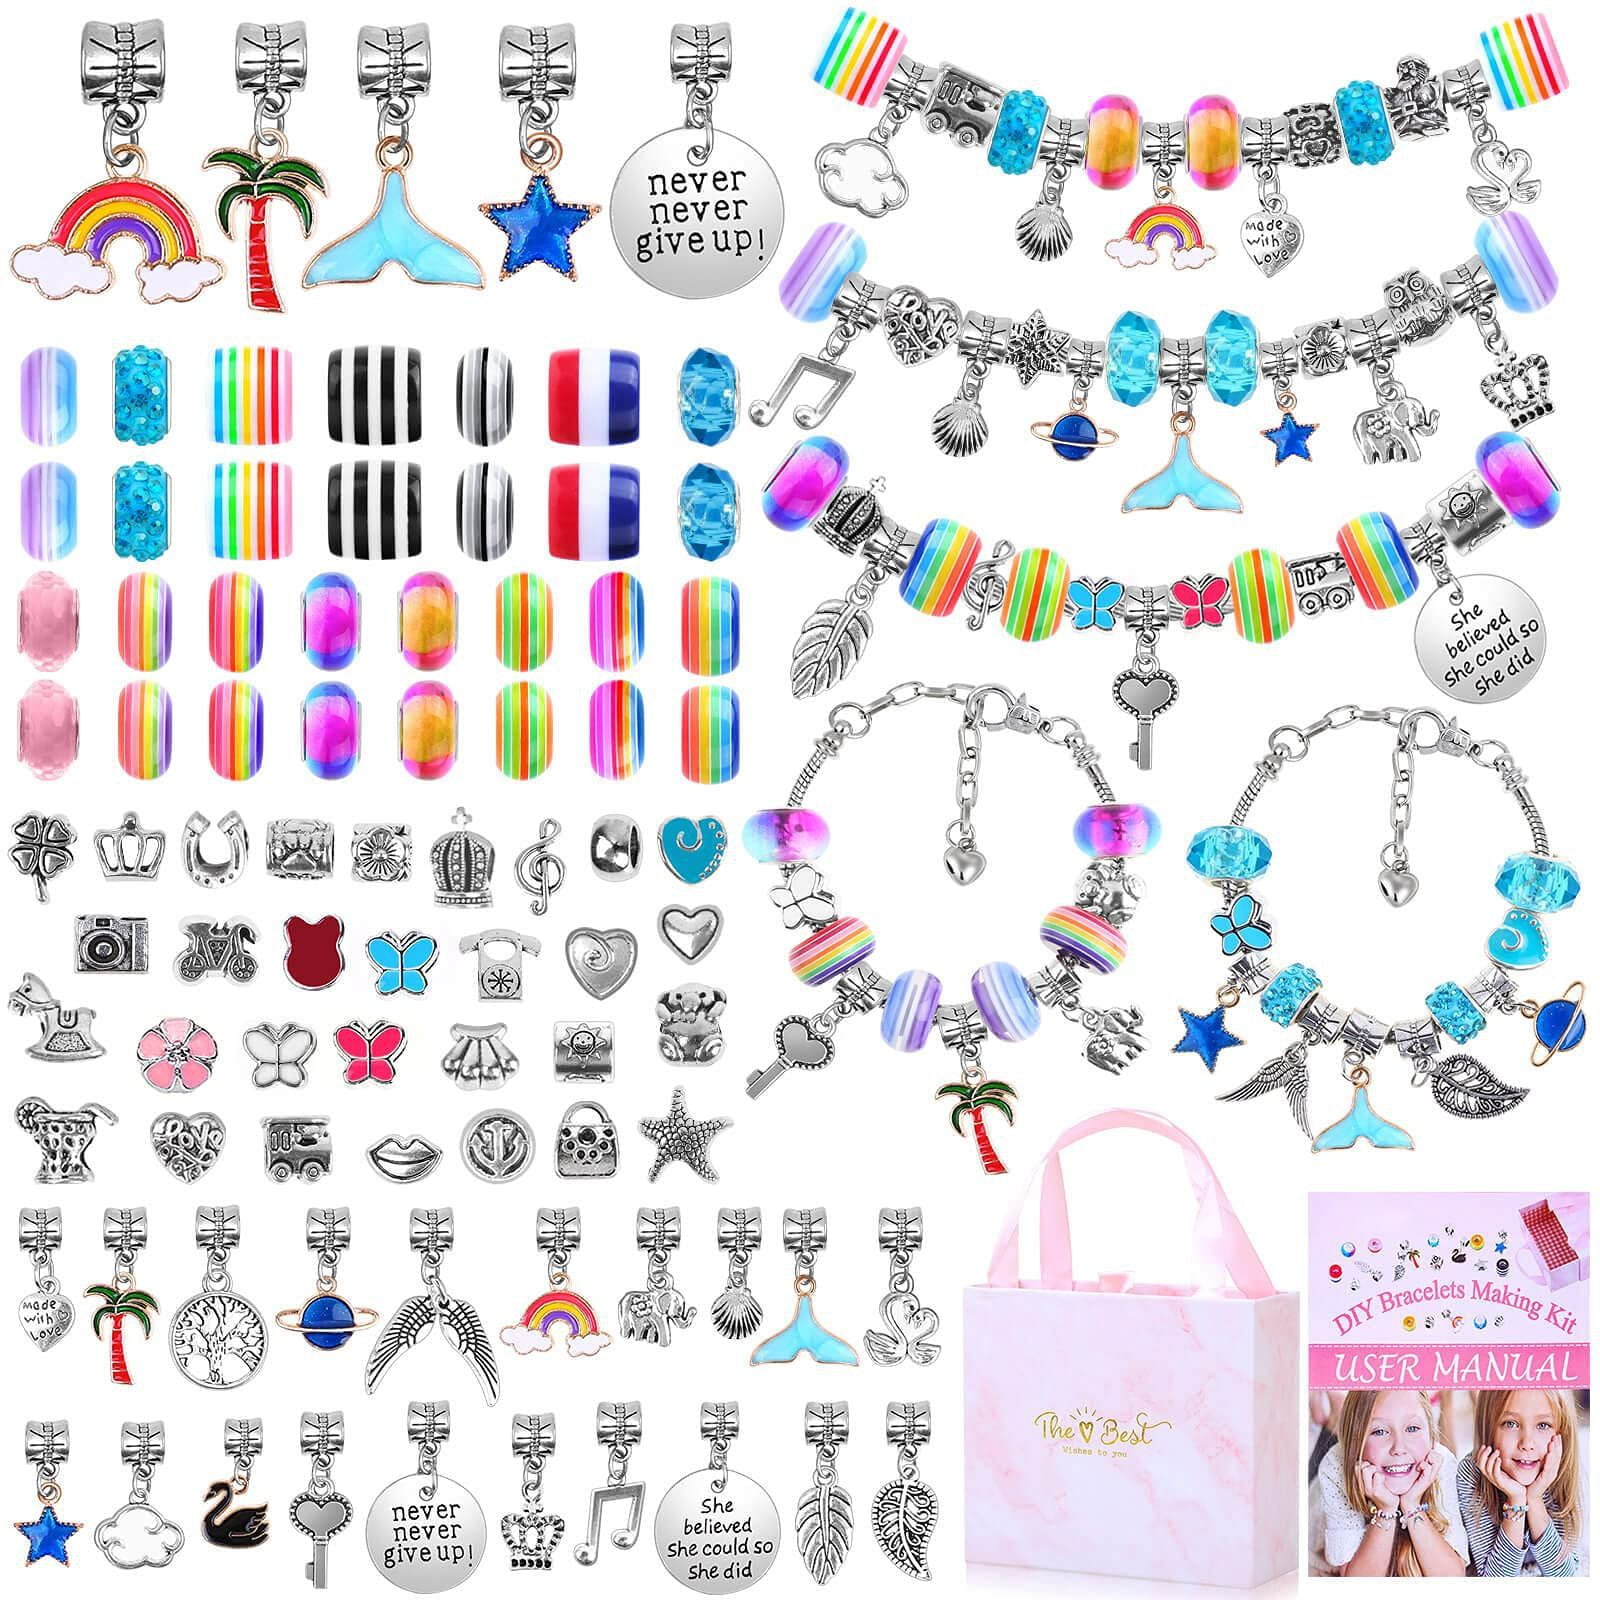 Mckanti 150 Pieces Charm Bracelet Making Kit for Girls, Charm Bracelets  Jewelry Making Kit with Beads Bracelets Charms Necklace DIY Crafts Gifts  Set for Teen Gi…